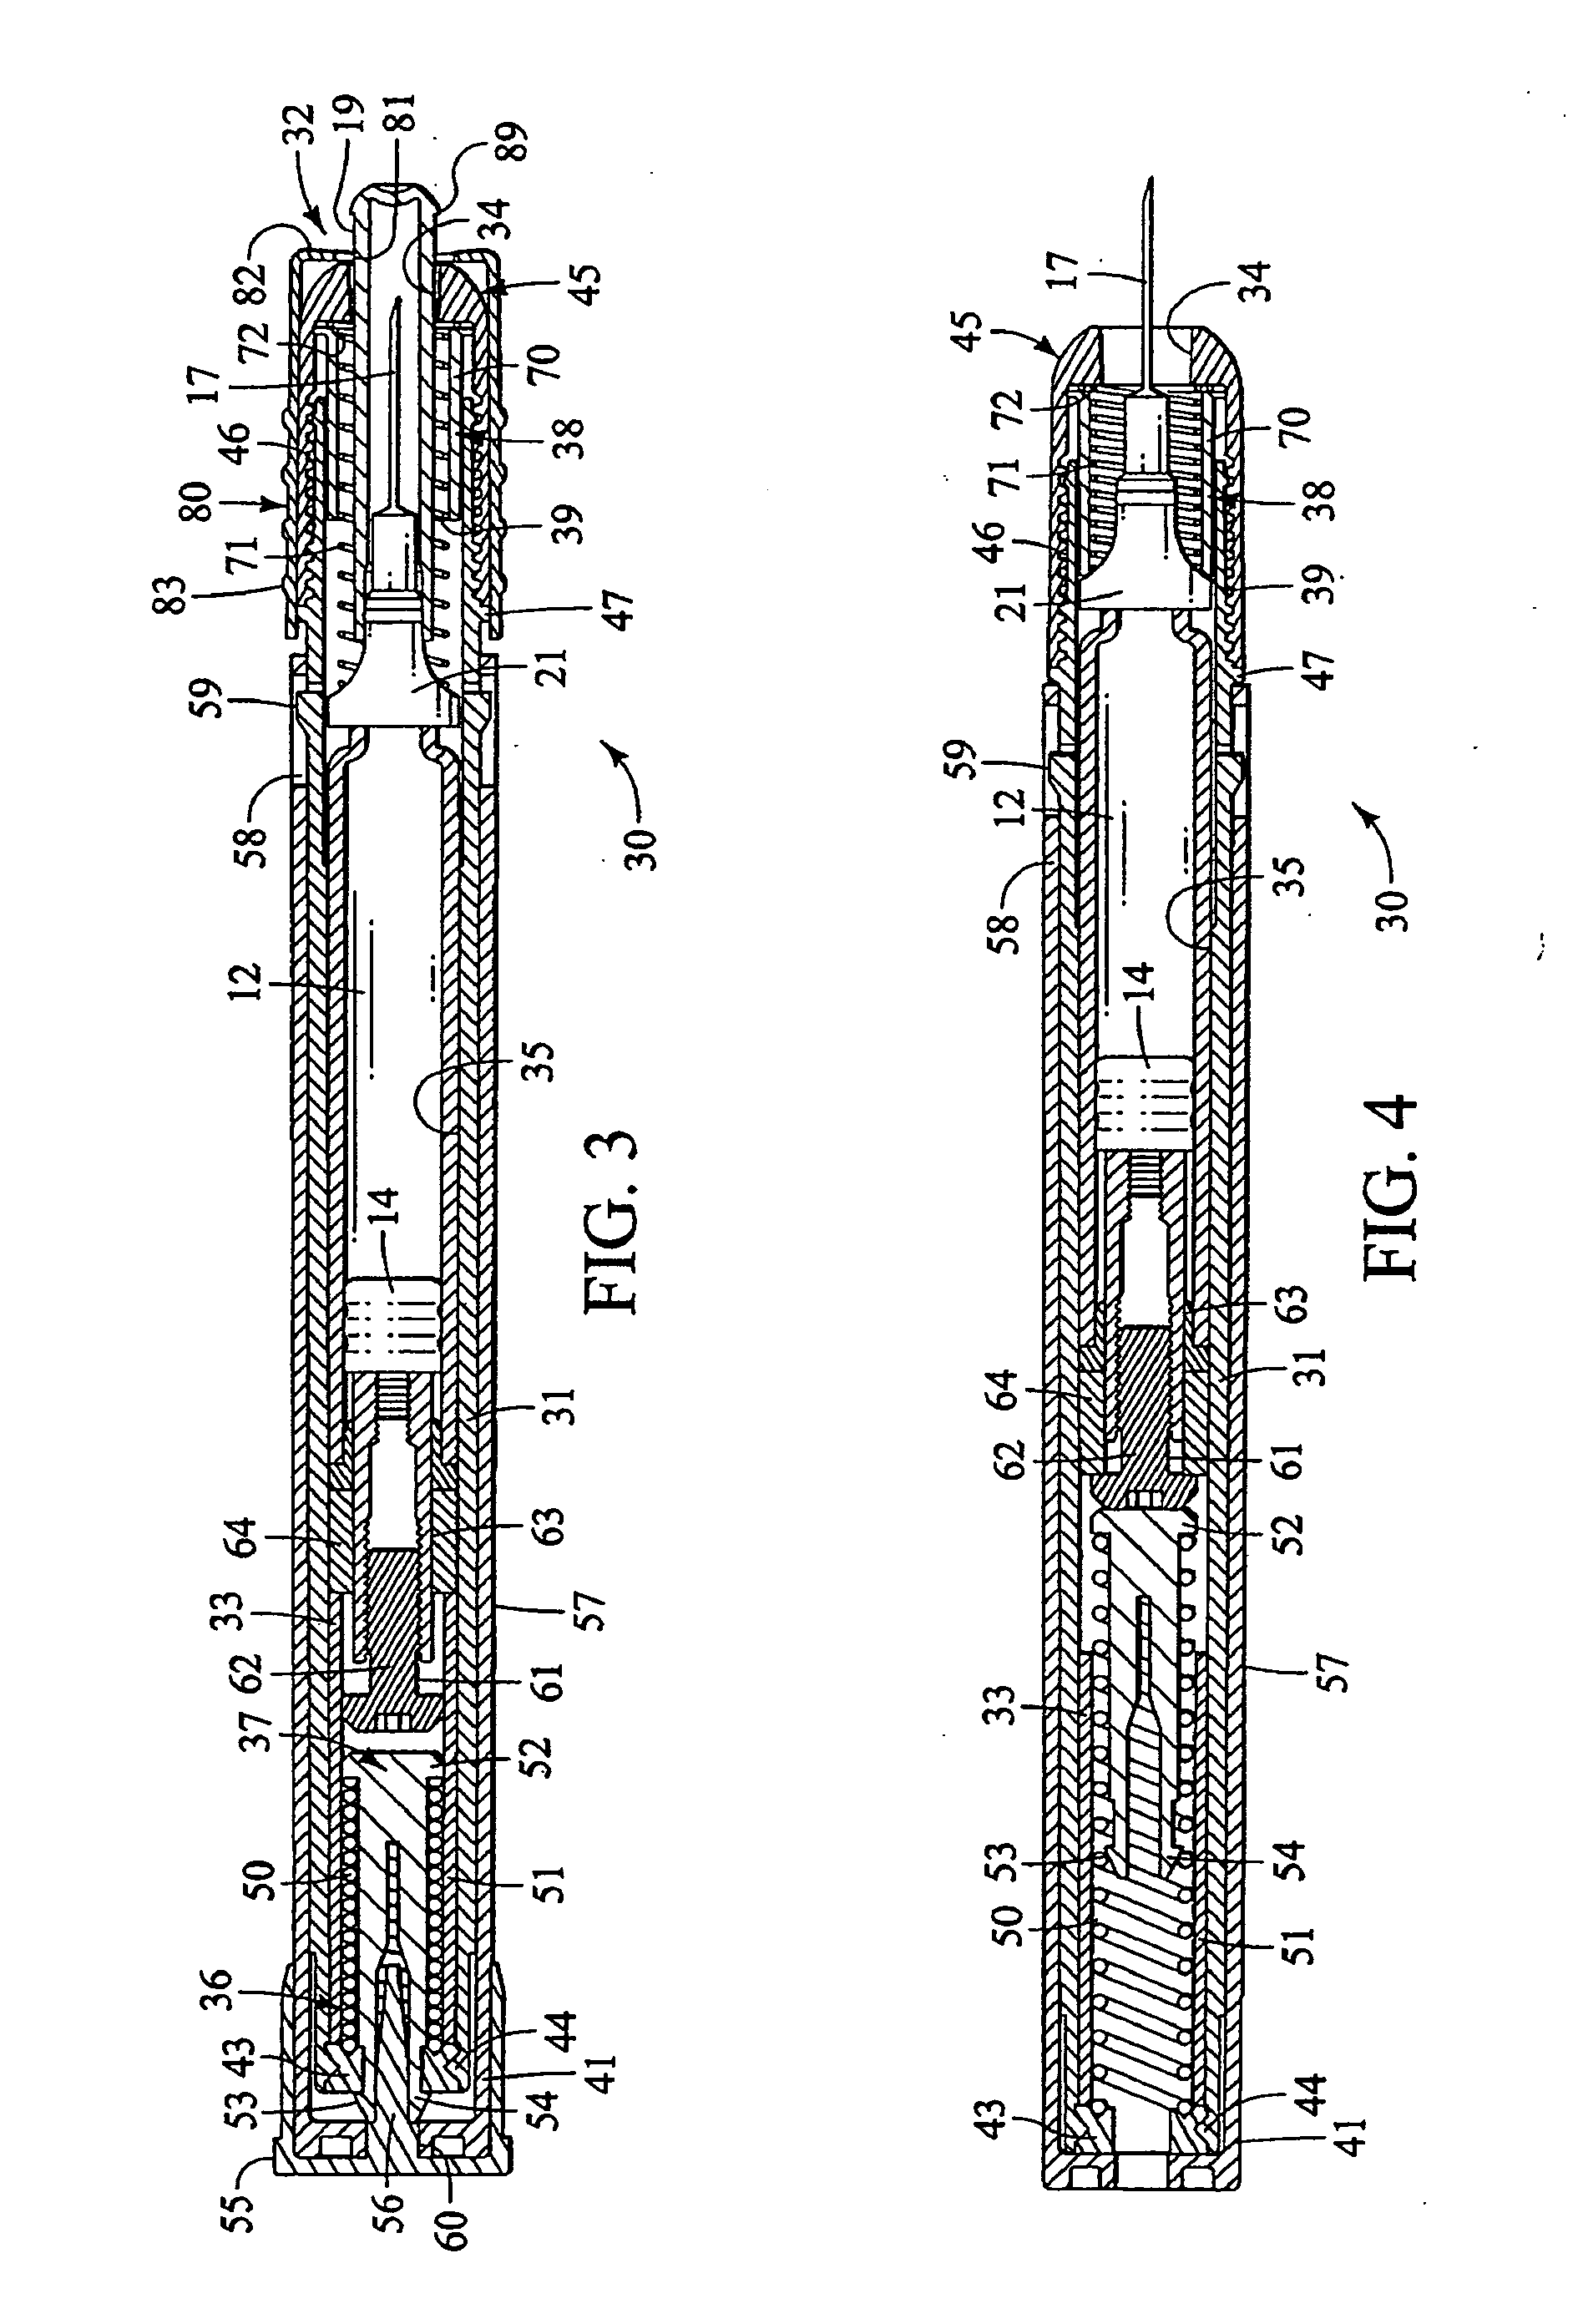 Method and apparatus for delivering epinephrine